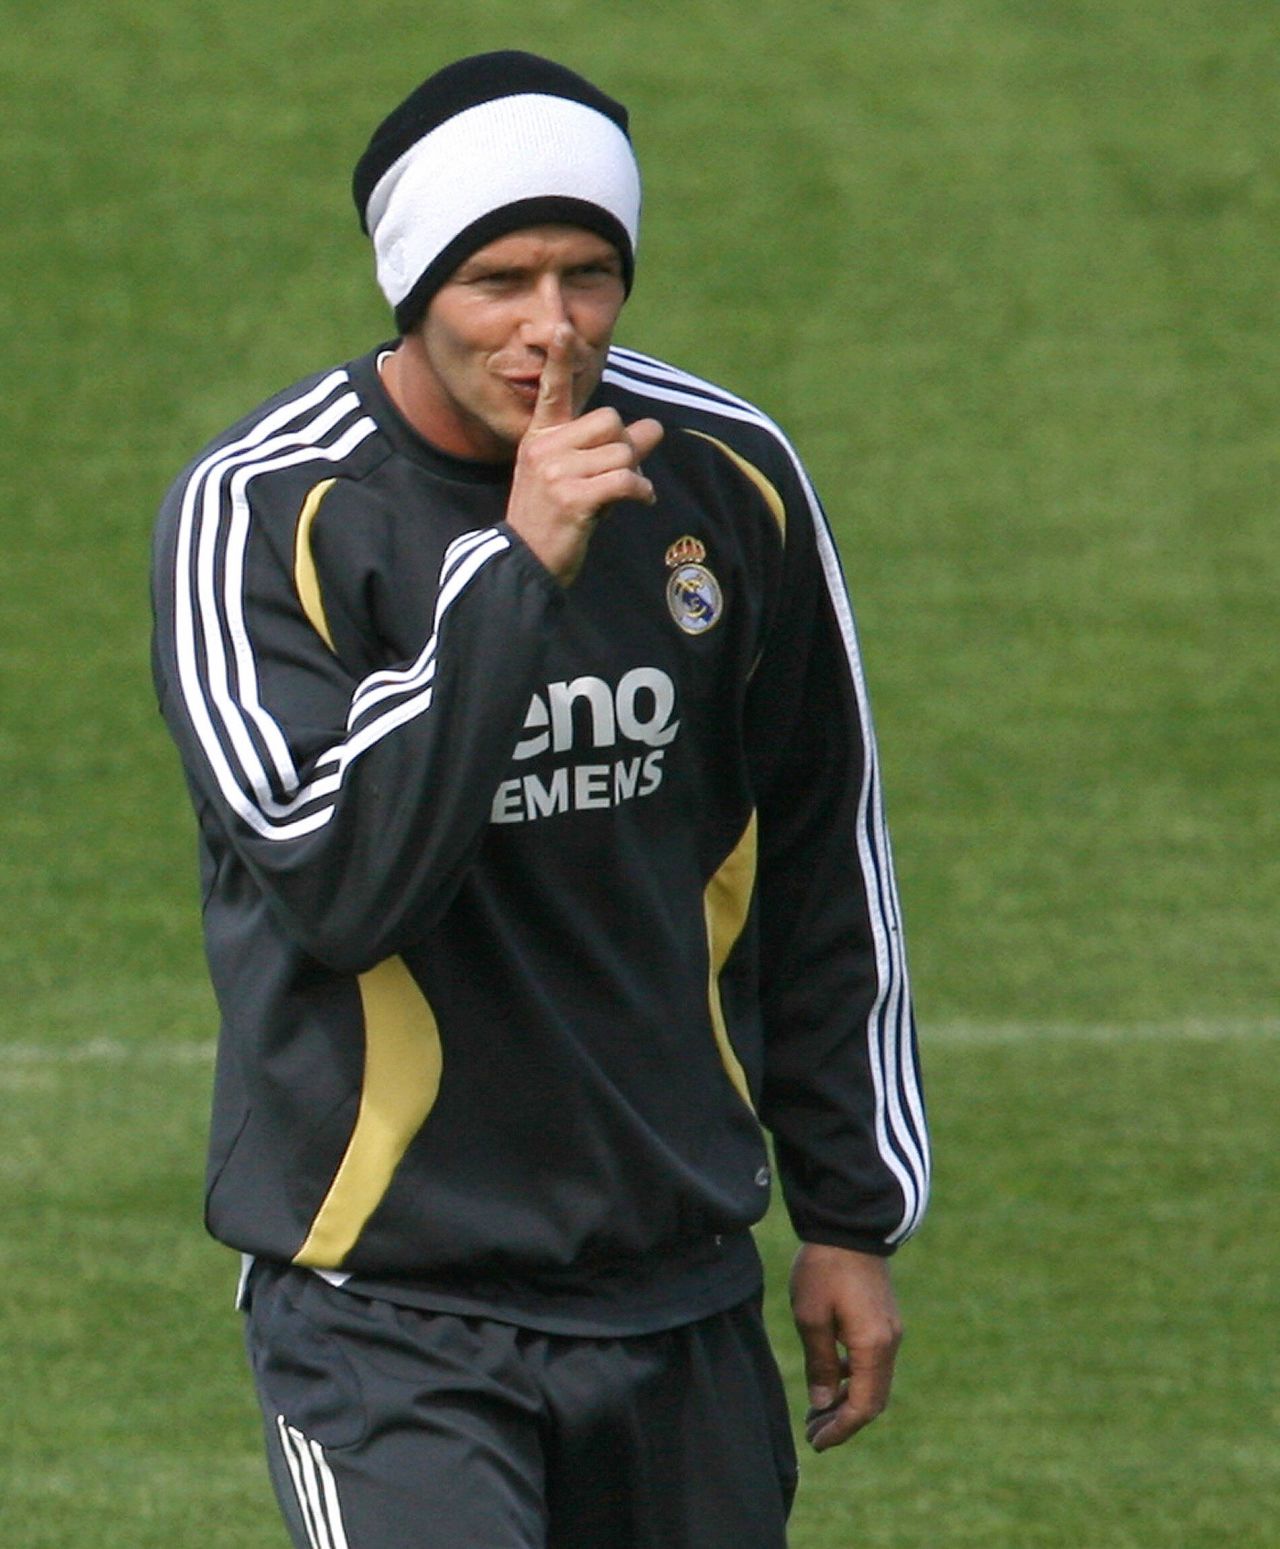 Although Beckham's life is under constant media scrutiny, sometimes he likes to tease -- here hiding his new hairstyle during a training session in Madrid.